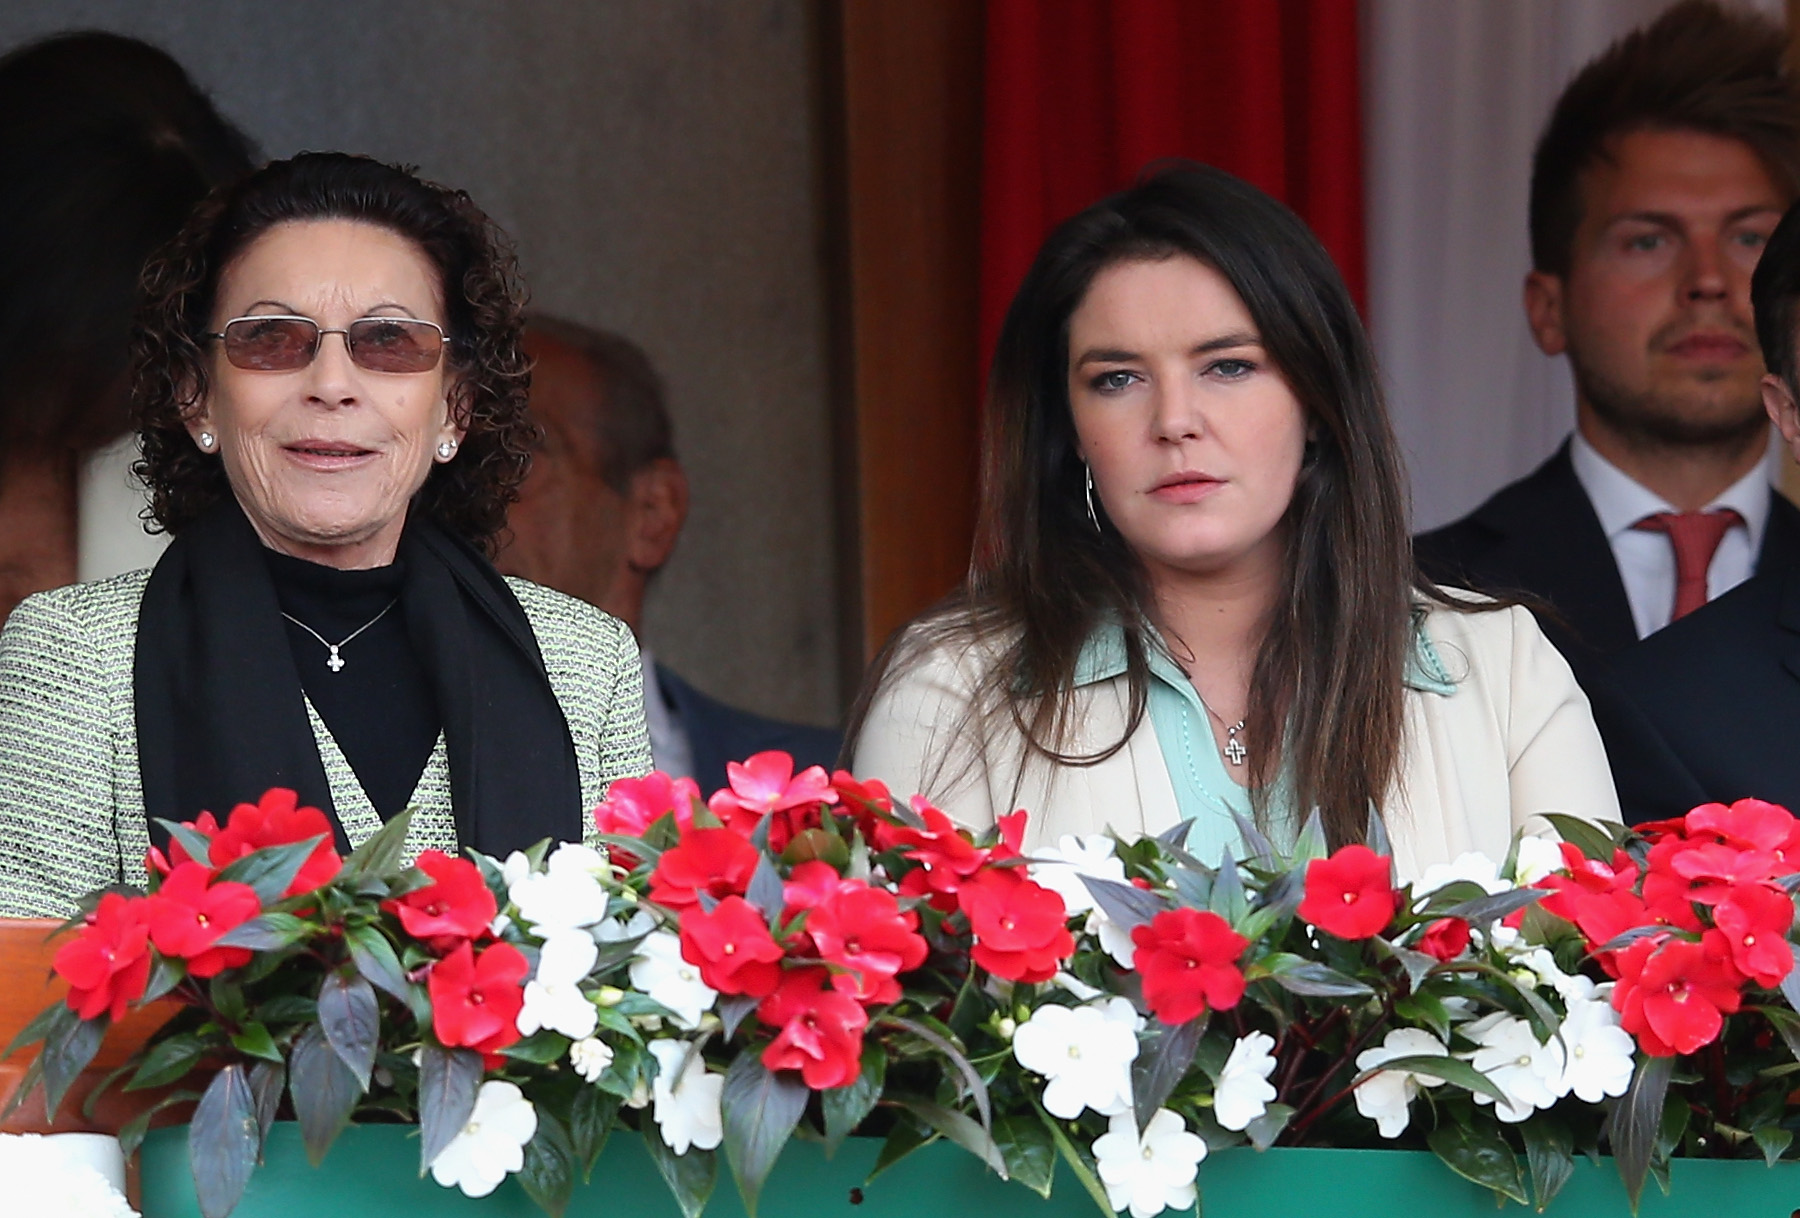 MONTE-CARLO, MONACO - APRIL 20:  Elisabeth-Anne de Massy and Melanie-Antoinette de Massy attend the final between Roger Federer of Switzerland and Stanislas Wawrinka of Switzerland during day eight of the ATP Monte Carlo Rolex Masters Tennis at Monte-Carlo Sporting Club on April 20, 2014 in Monte-Carlo, Monaco.  (Photo by Julian Finney/Getty Images)